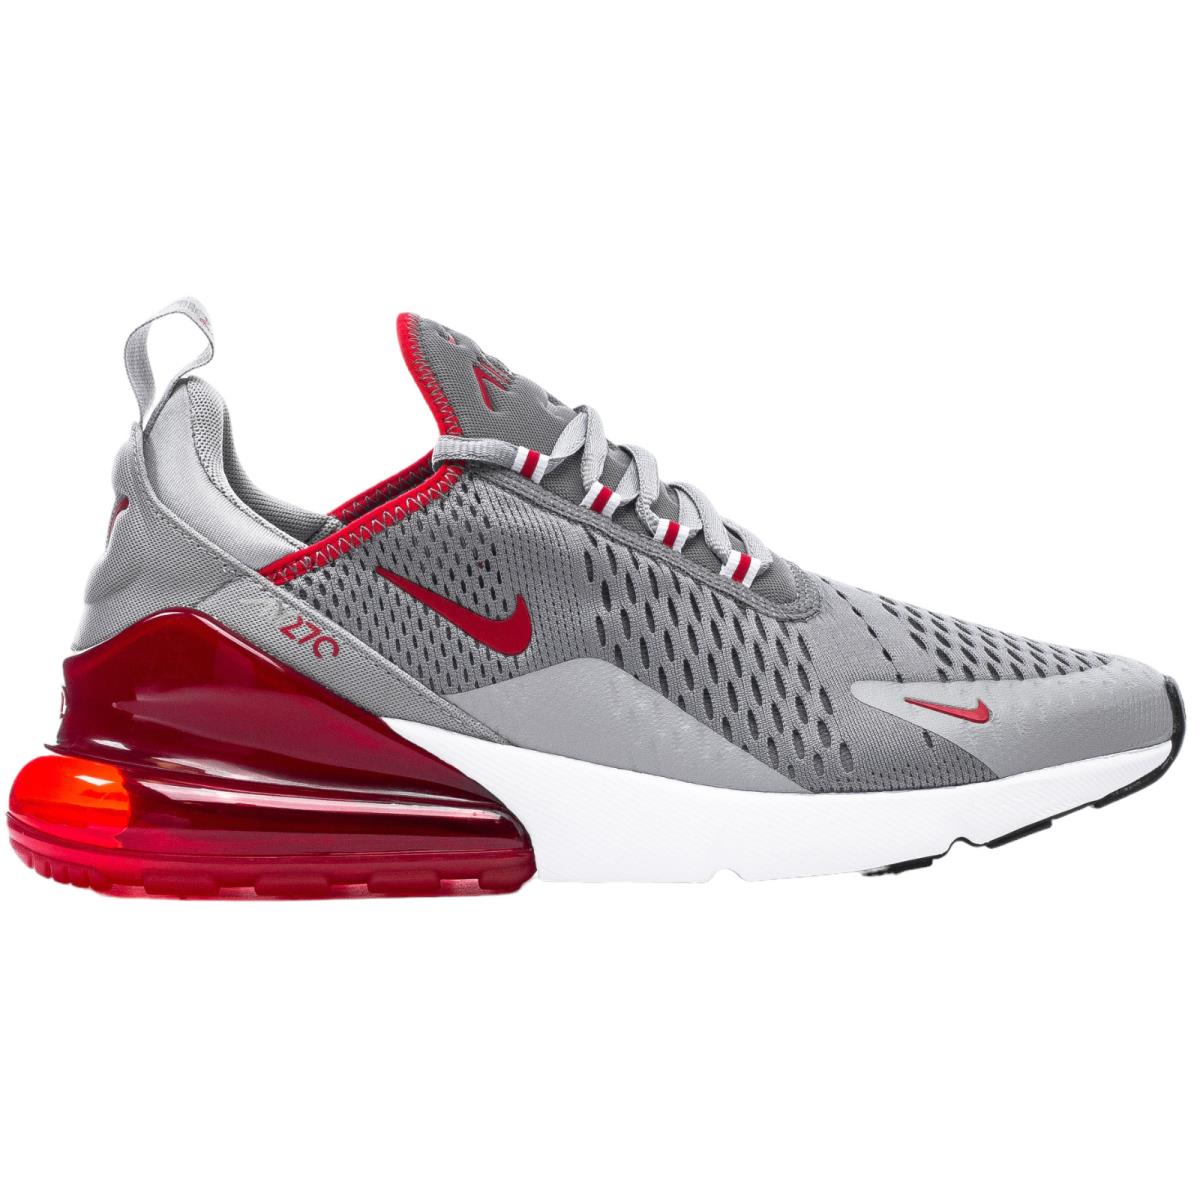 Nike Air Max 270 Men`s Grey University Red US Sizes 7-14 - CW7048 001 - Particle Grey/University Red